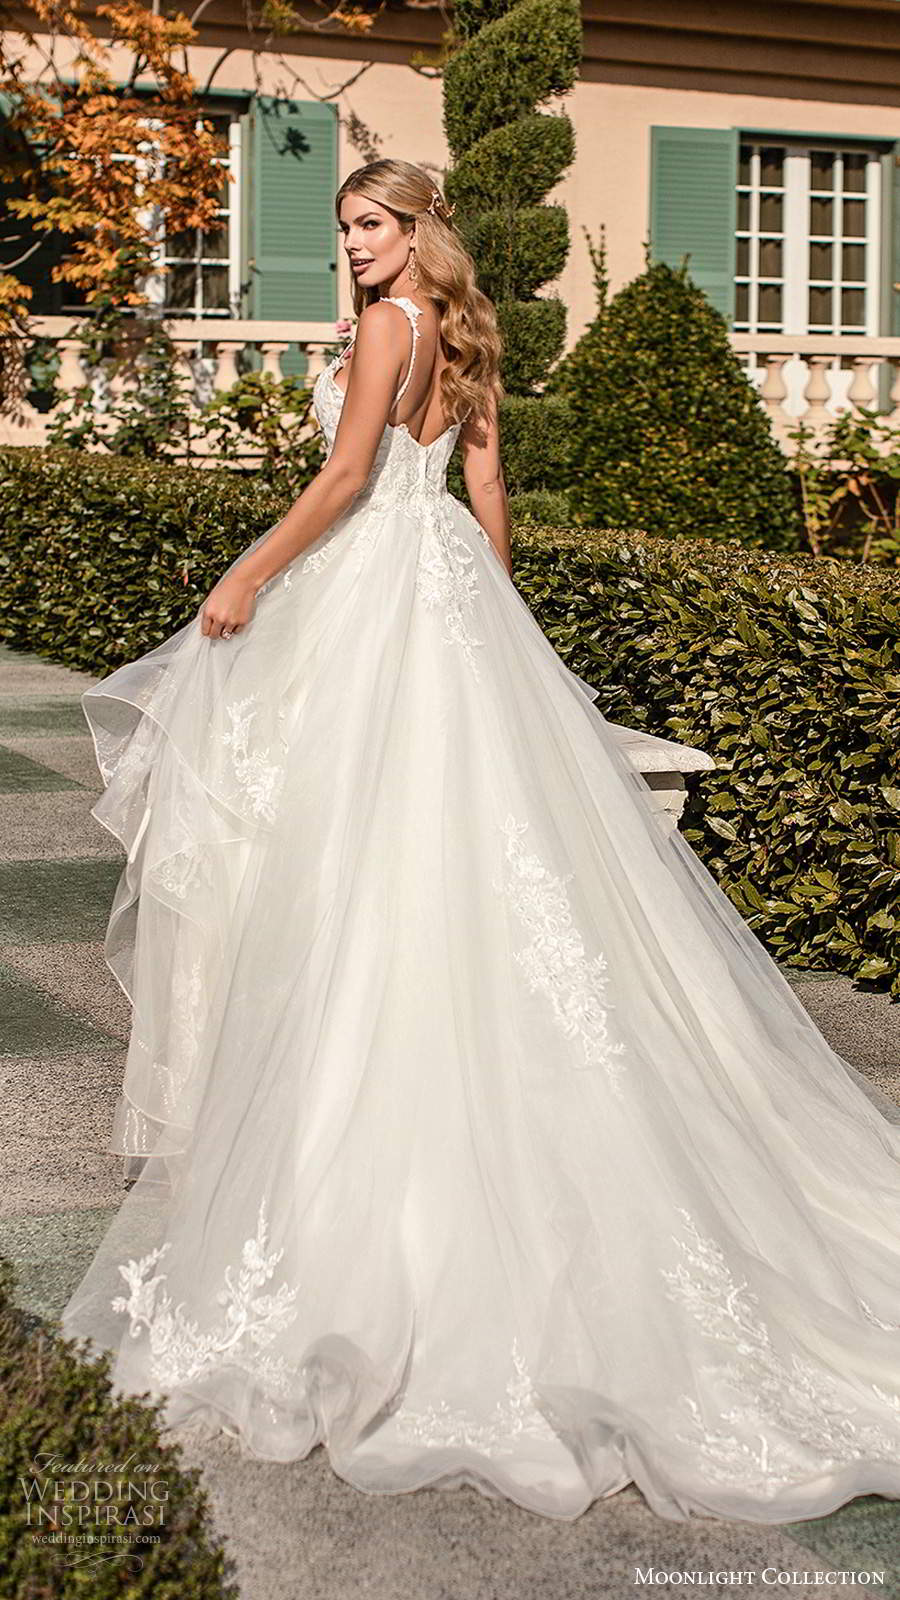 moonlight collection fall 2020 bridal sleeveless straps sweetheart neckline heavily embellished bodice a line ball gown wedding dress chapel train (10) bv